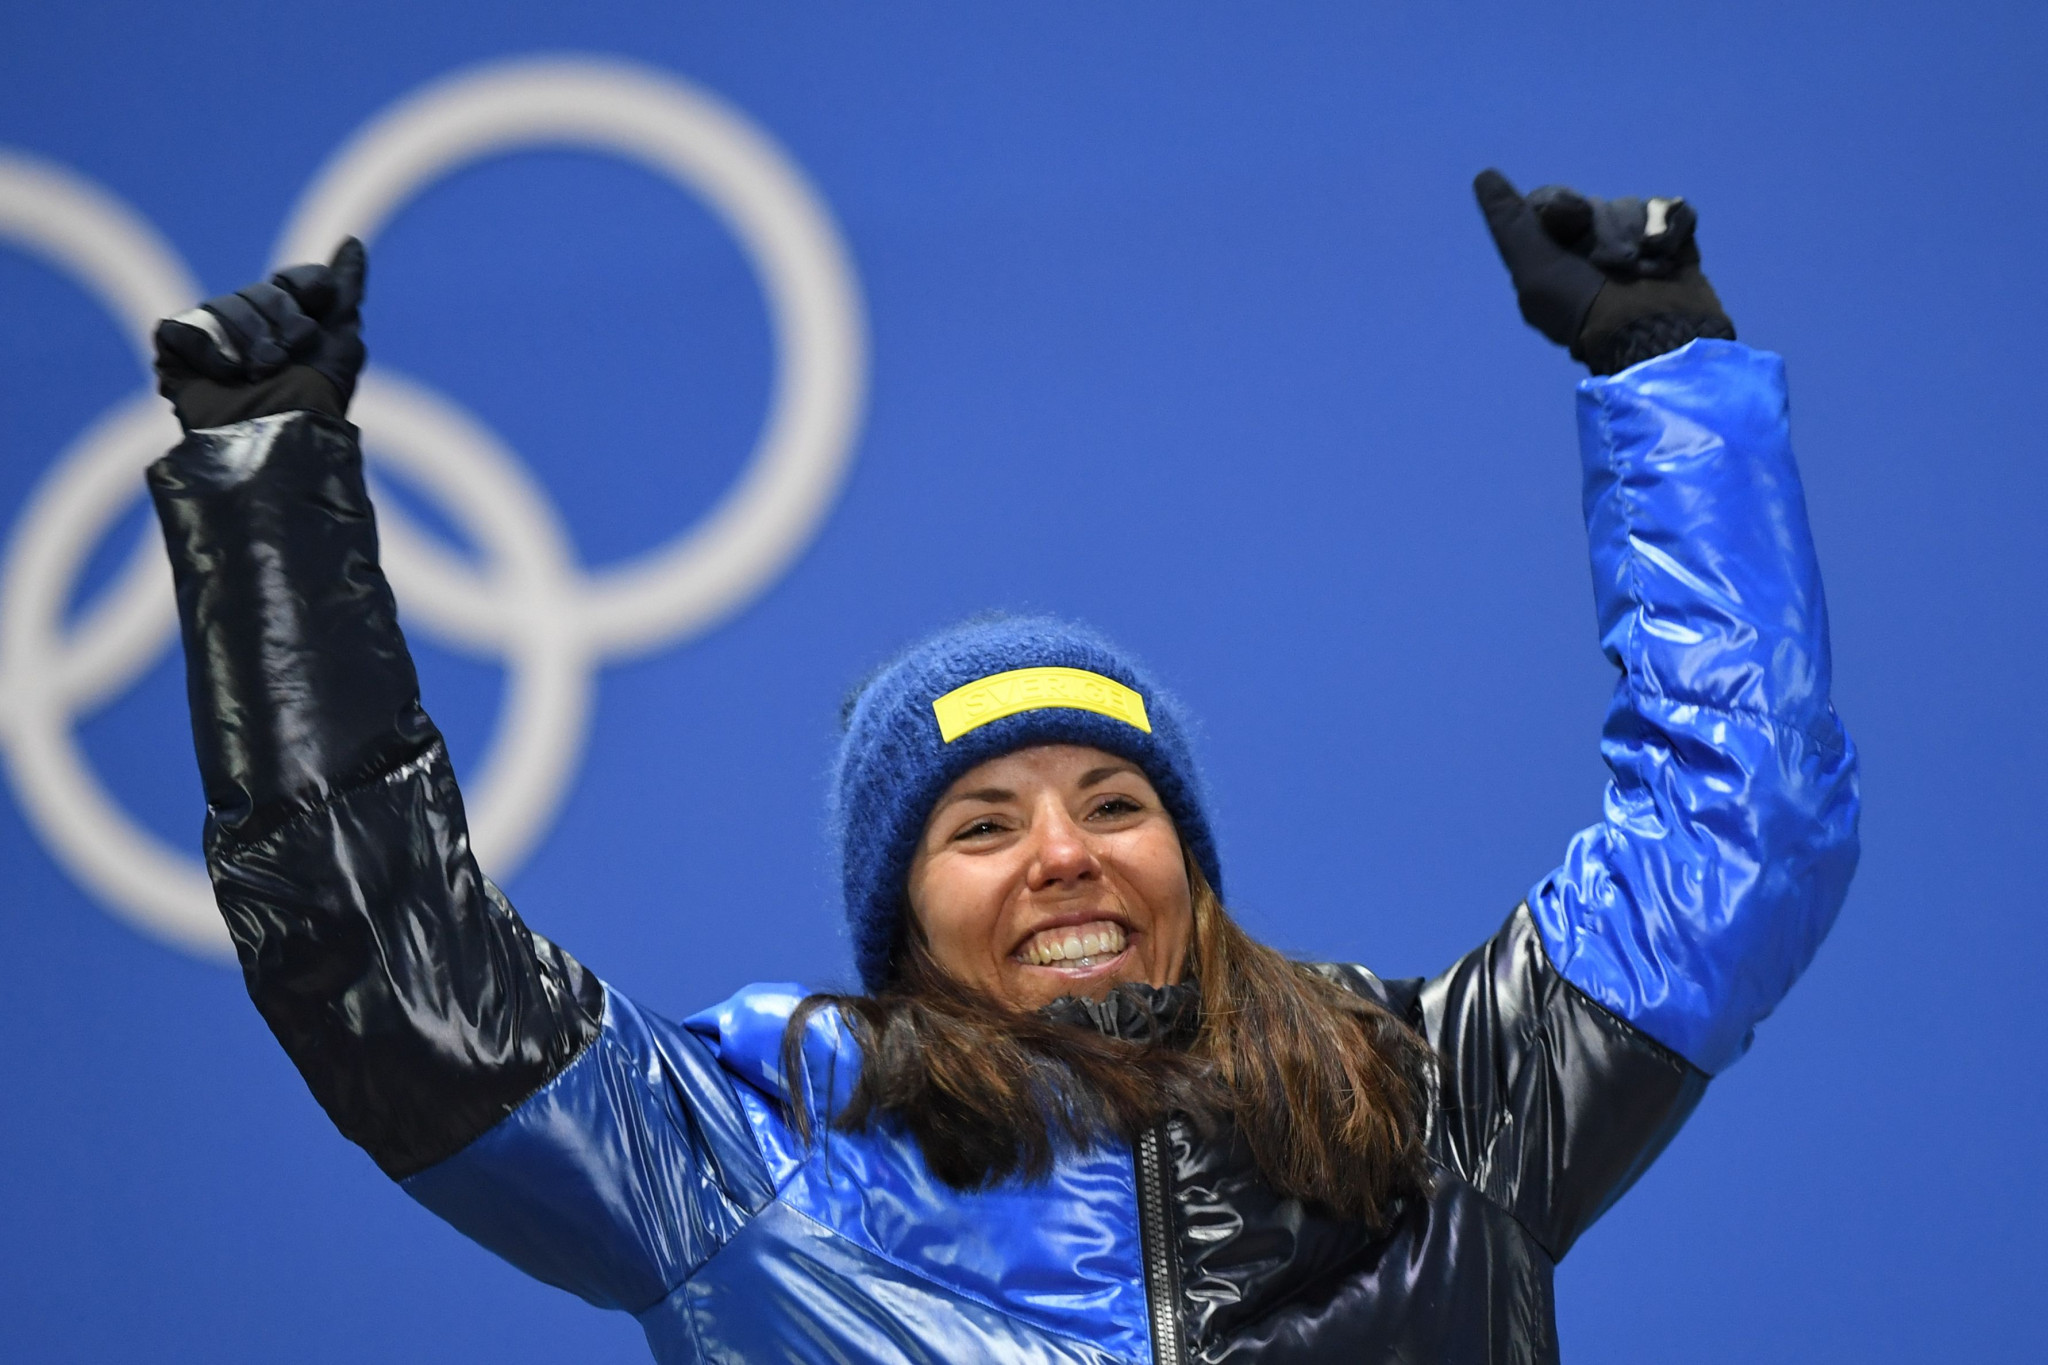 Sweden’s Charlotte Kalla claimed the first gold medal of the Pyeongchang 2018 Winter Olympic Games after winning the women’s 7.5 kilometres + 7.5km skiathlon event today ©Getty Images